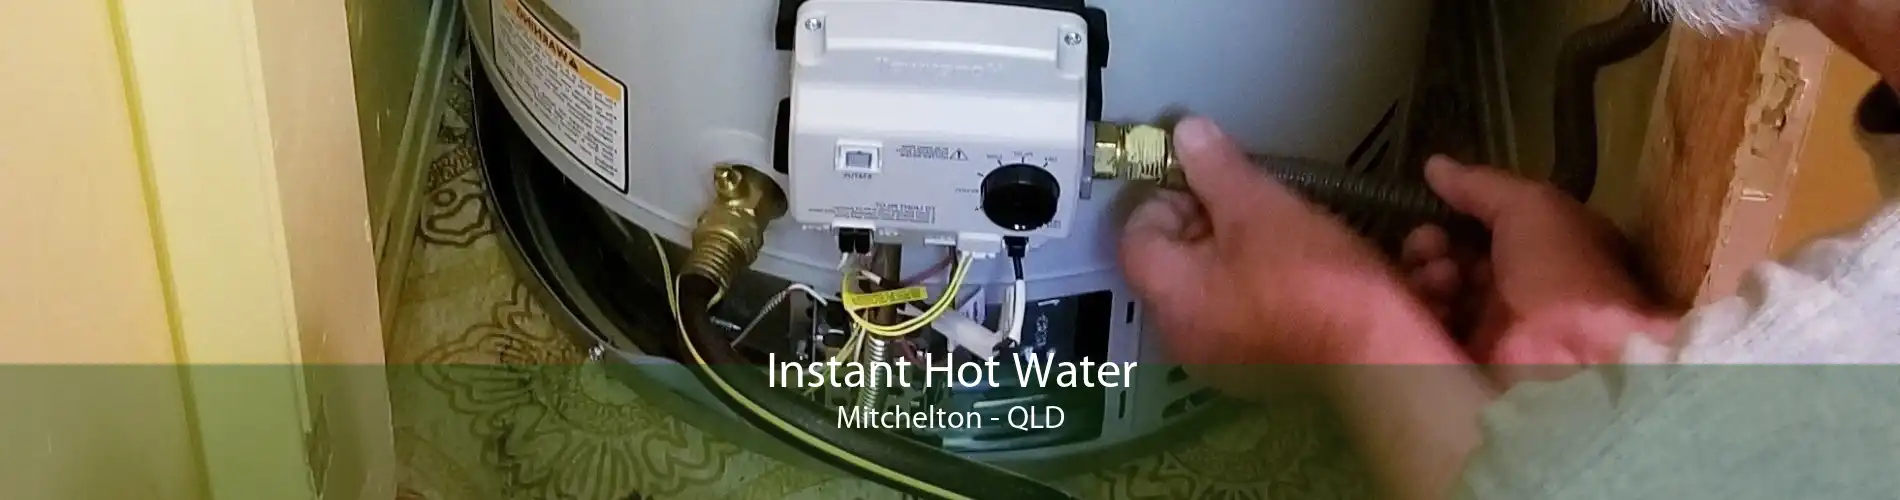 Instant Hot Water Mitchelton - QLD